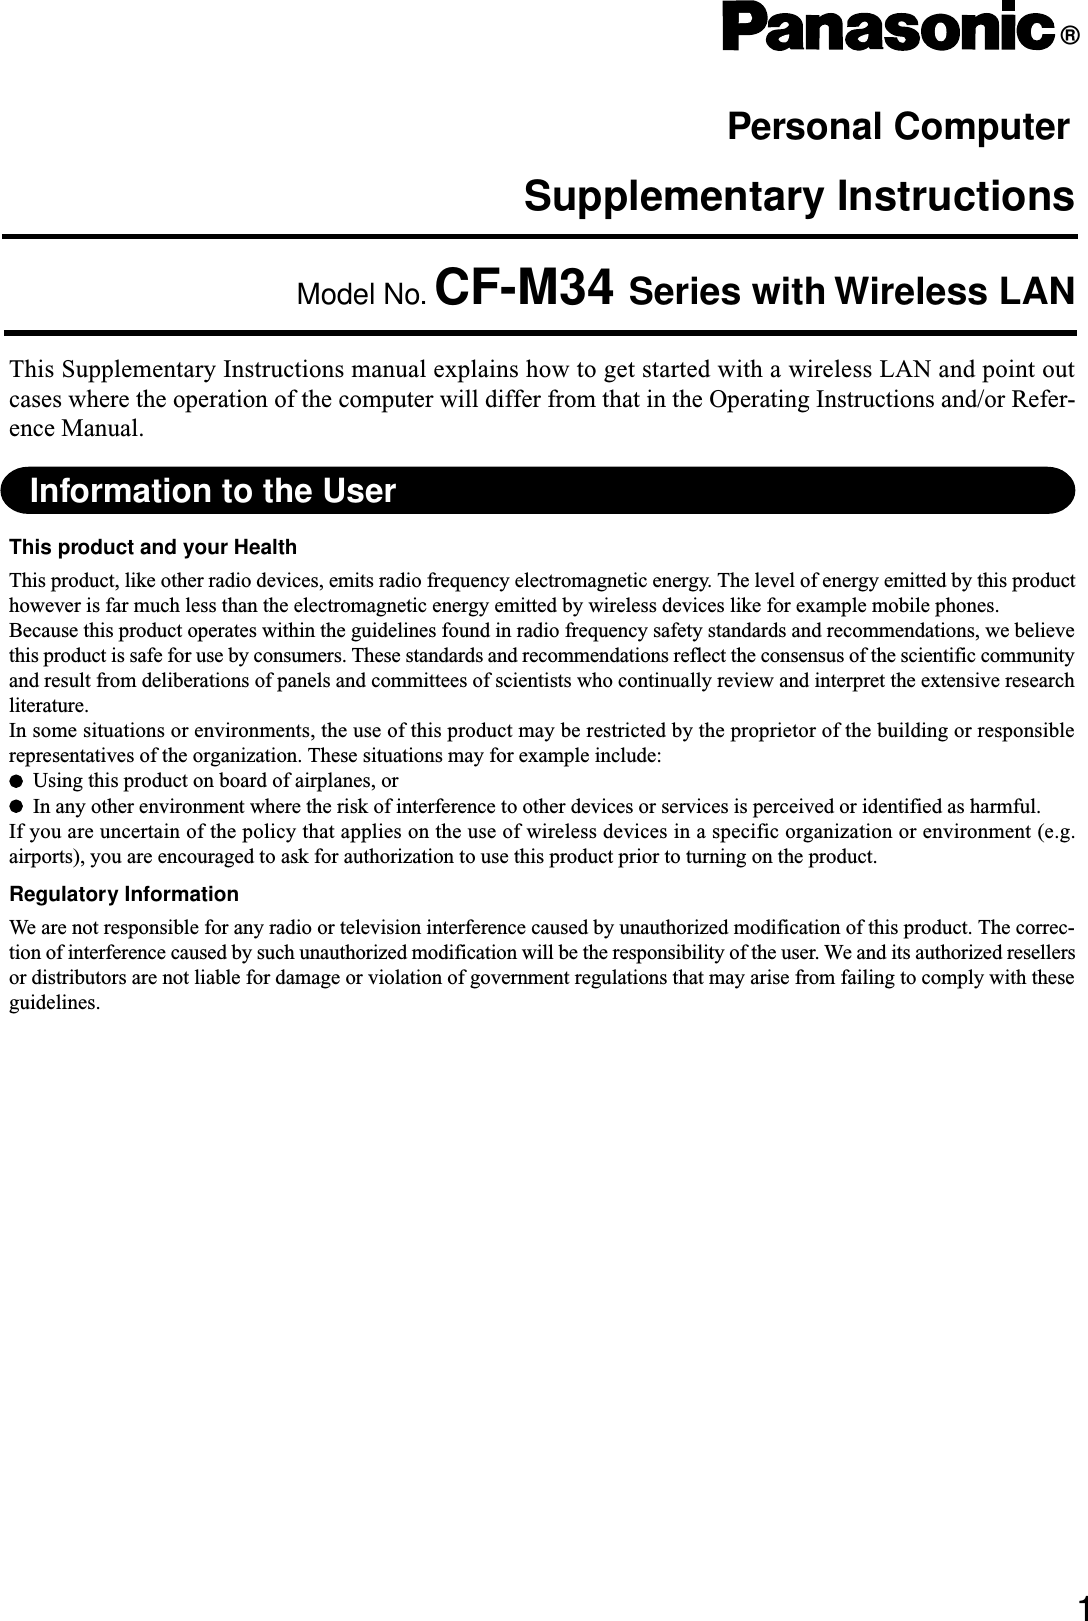 Supplementary InstructionsPersonal Computer®This Supplementary Instructions manual explains how to get started with a wireless LAN and point outcases where the operation of the computer will differ from that in the Operating Instructions and/or Refer-ence Manual.Model No. CF-M34 Series with Wireless LAN1Information to the UserThis product and your HealthThis product, like other radio devices, emits radio frequency electromagnetic energy. The level of energy emitted by this producthowever is far much less than the electromagnetic energy emitted by wireless devices like for example mobile phones.Because this product operates within the guidelines found in radio frequency safety standards and recommendations, we believethis product is safe for use by consumers. These standards and recommendations reflect the consensus of the scientific communityand result from deliberations of panels and committees of scientists who continually review and interpret the extensive researchliterature.In some situations or environments, the use of this product may be restricted by the proprietor of the building or responsiblerepresentatives of the organization. These situations may for example include:Using this product on board of airplanes, orIn any other environment where the risk of interference to other devices or services is perceived or identified as harmful.If you are uncertain of the policy that applies on the use of wireless devices in a specific organization or environment (e.g.airports), you are encouraged to ask for authorization to use this product prior to turning on the product.Regulatory InformationWe are not responsible for any radio or television interference caused by unauthorized modification of this product. The correc-tion of interference caused by such unauthorized modification will be the responsibility of the user. We and its authorized resellersor distributors are not liable for damage or violation of government regulations that may arise from failing to comply with theseguidelines.